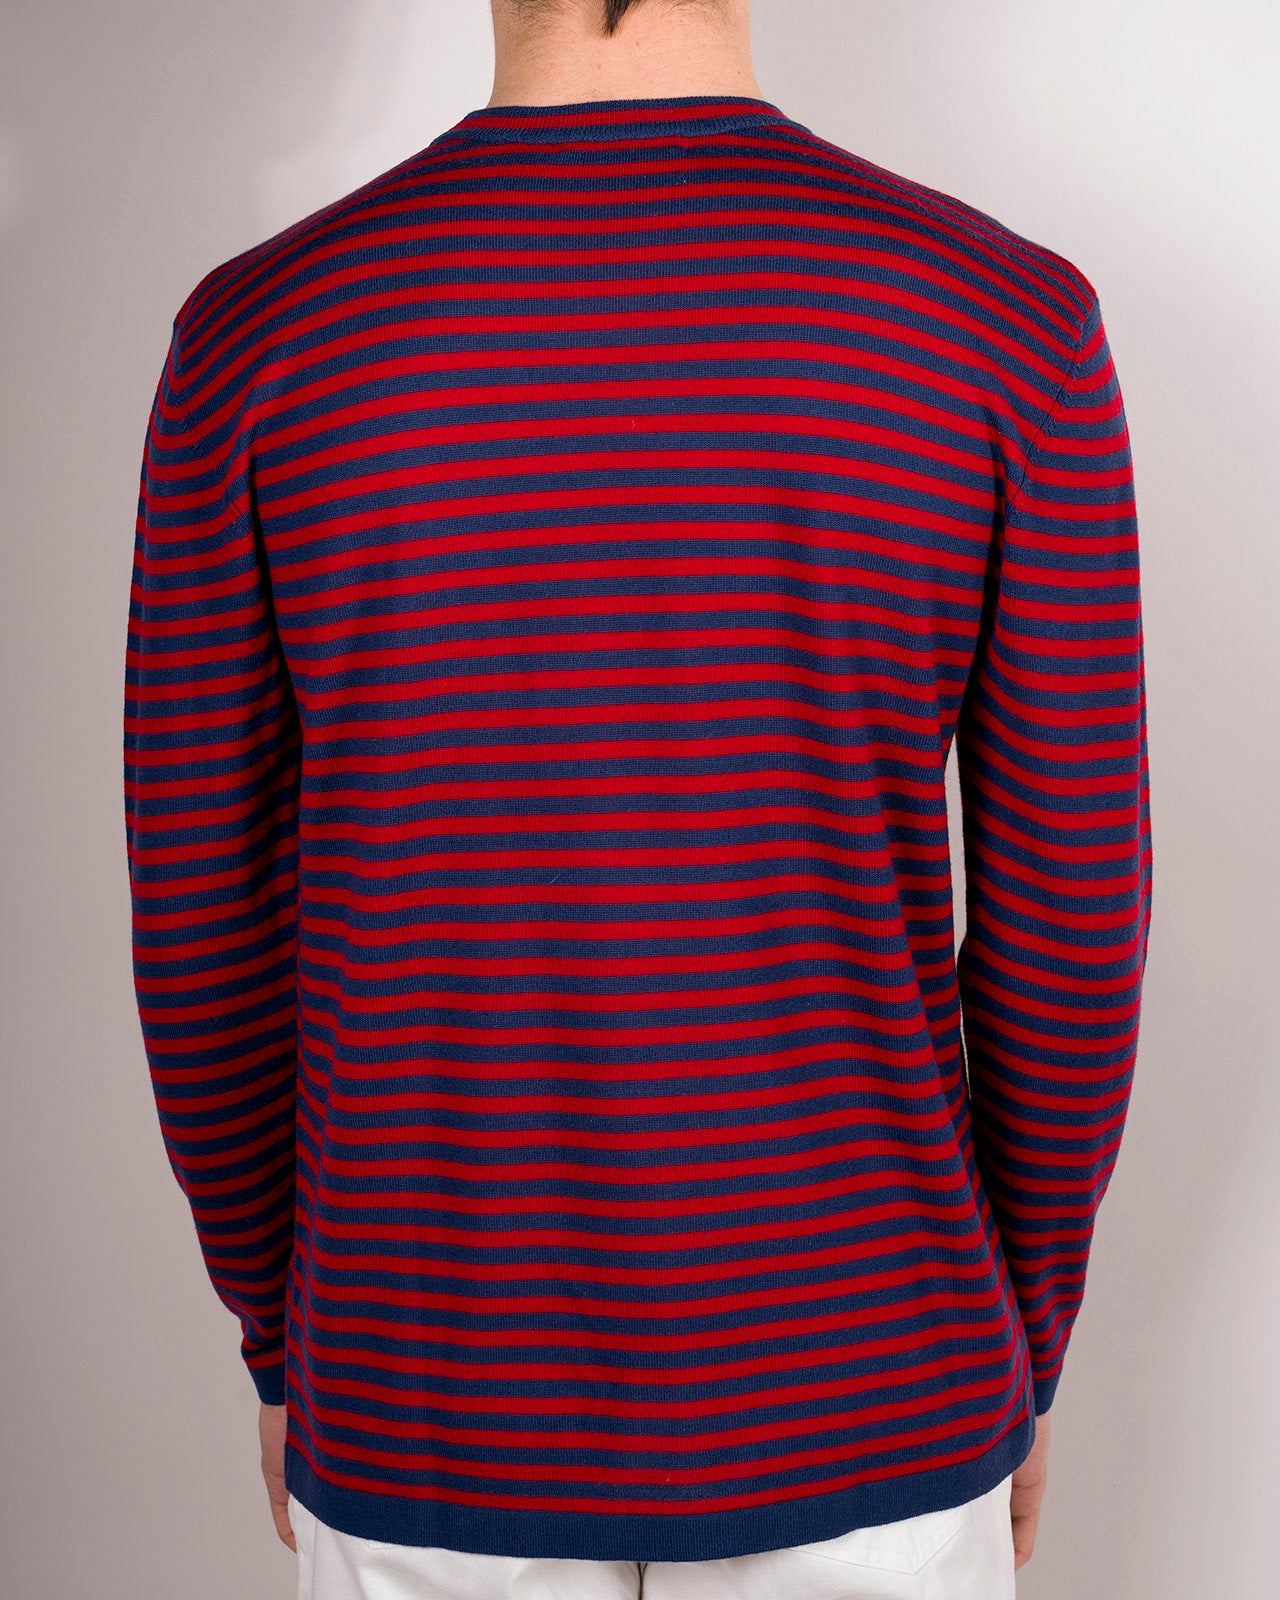 RONCOLA LIGHTWEIGHT RED-BLUE STRIPED CREW